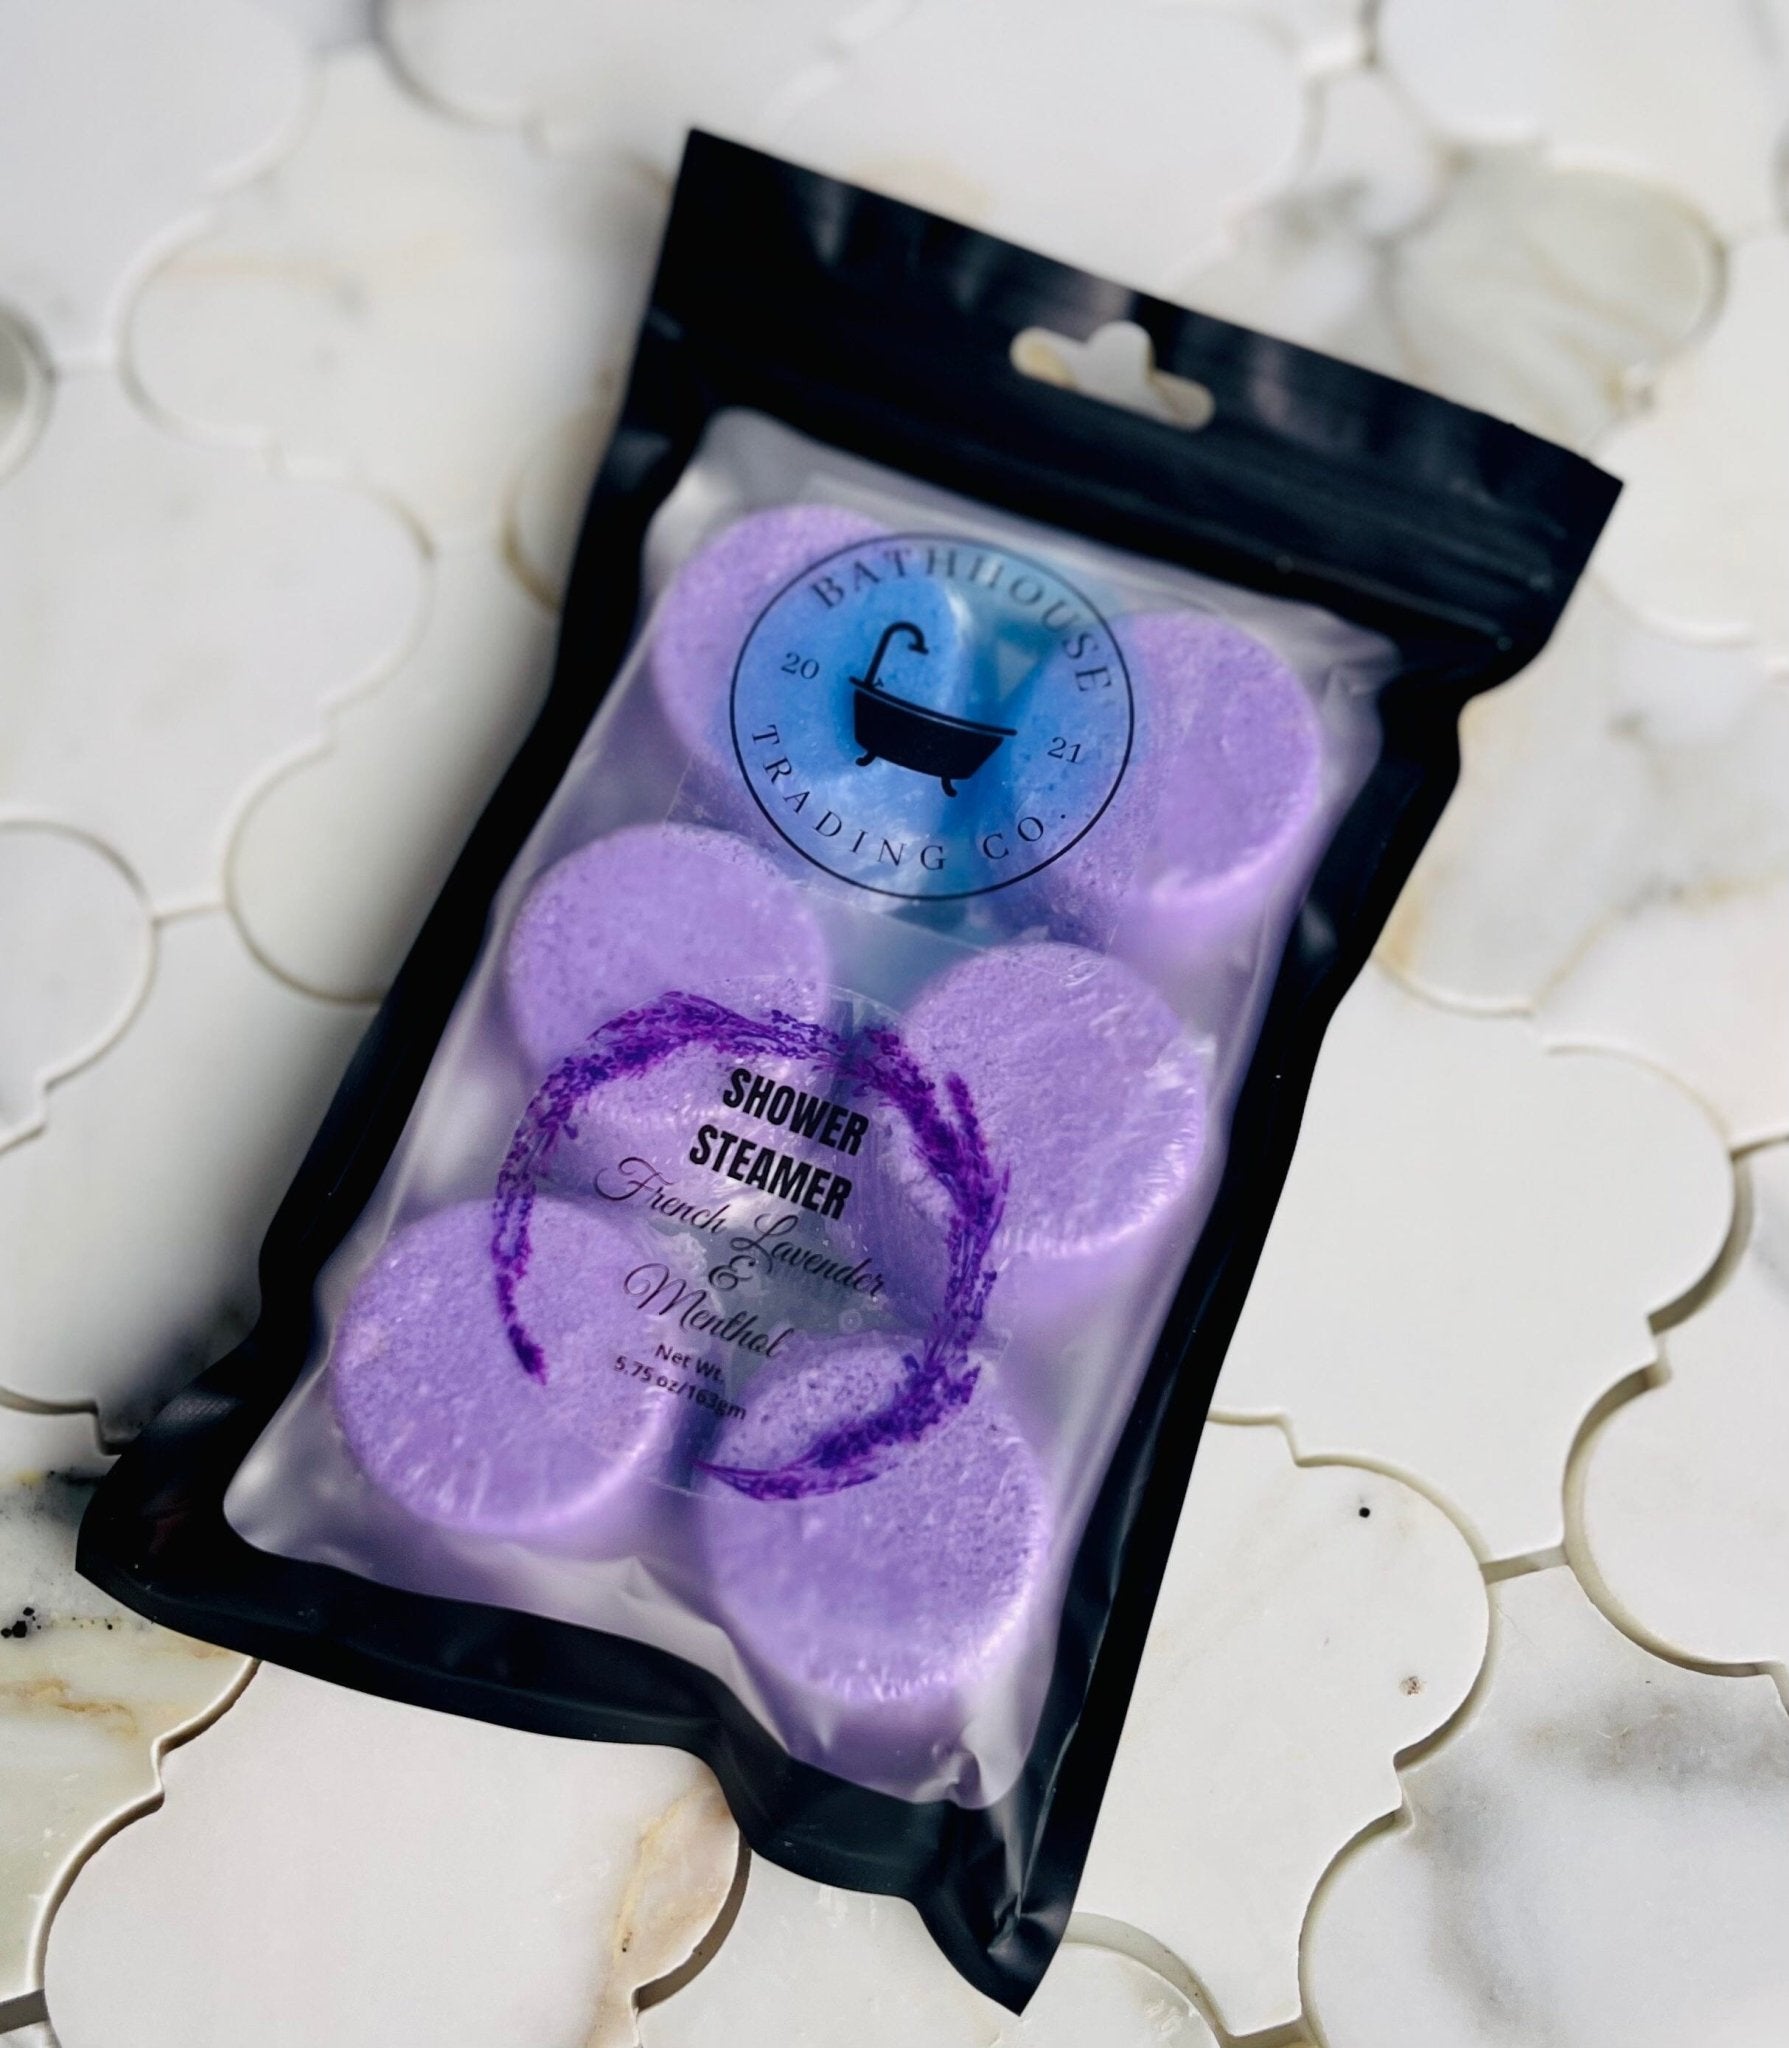 French Lavender & Menthol Shower Steamers - Bathhouse Trading Company